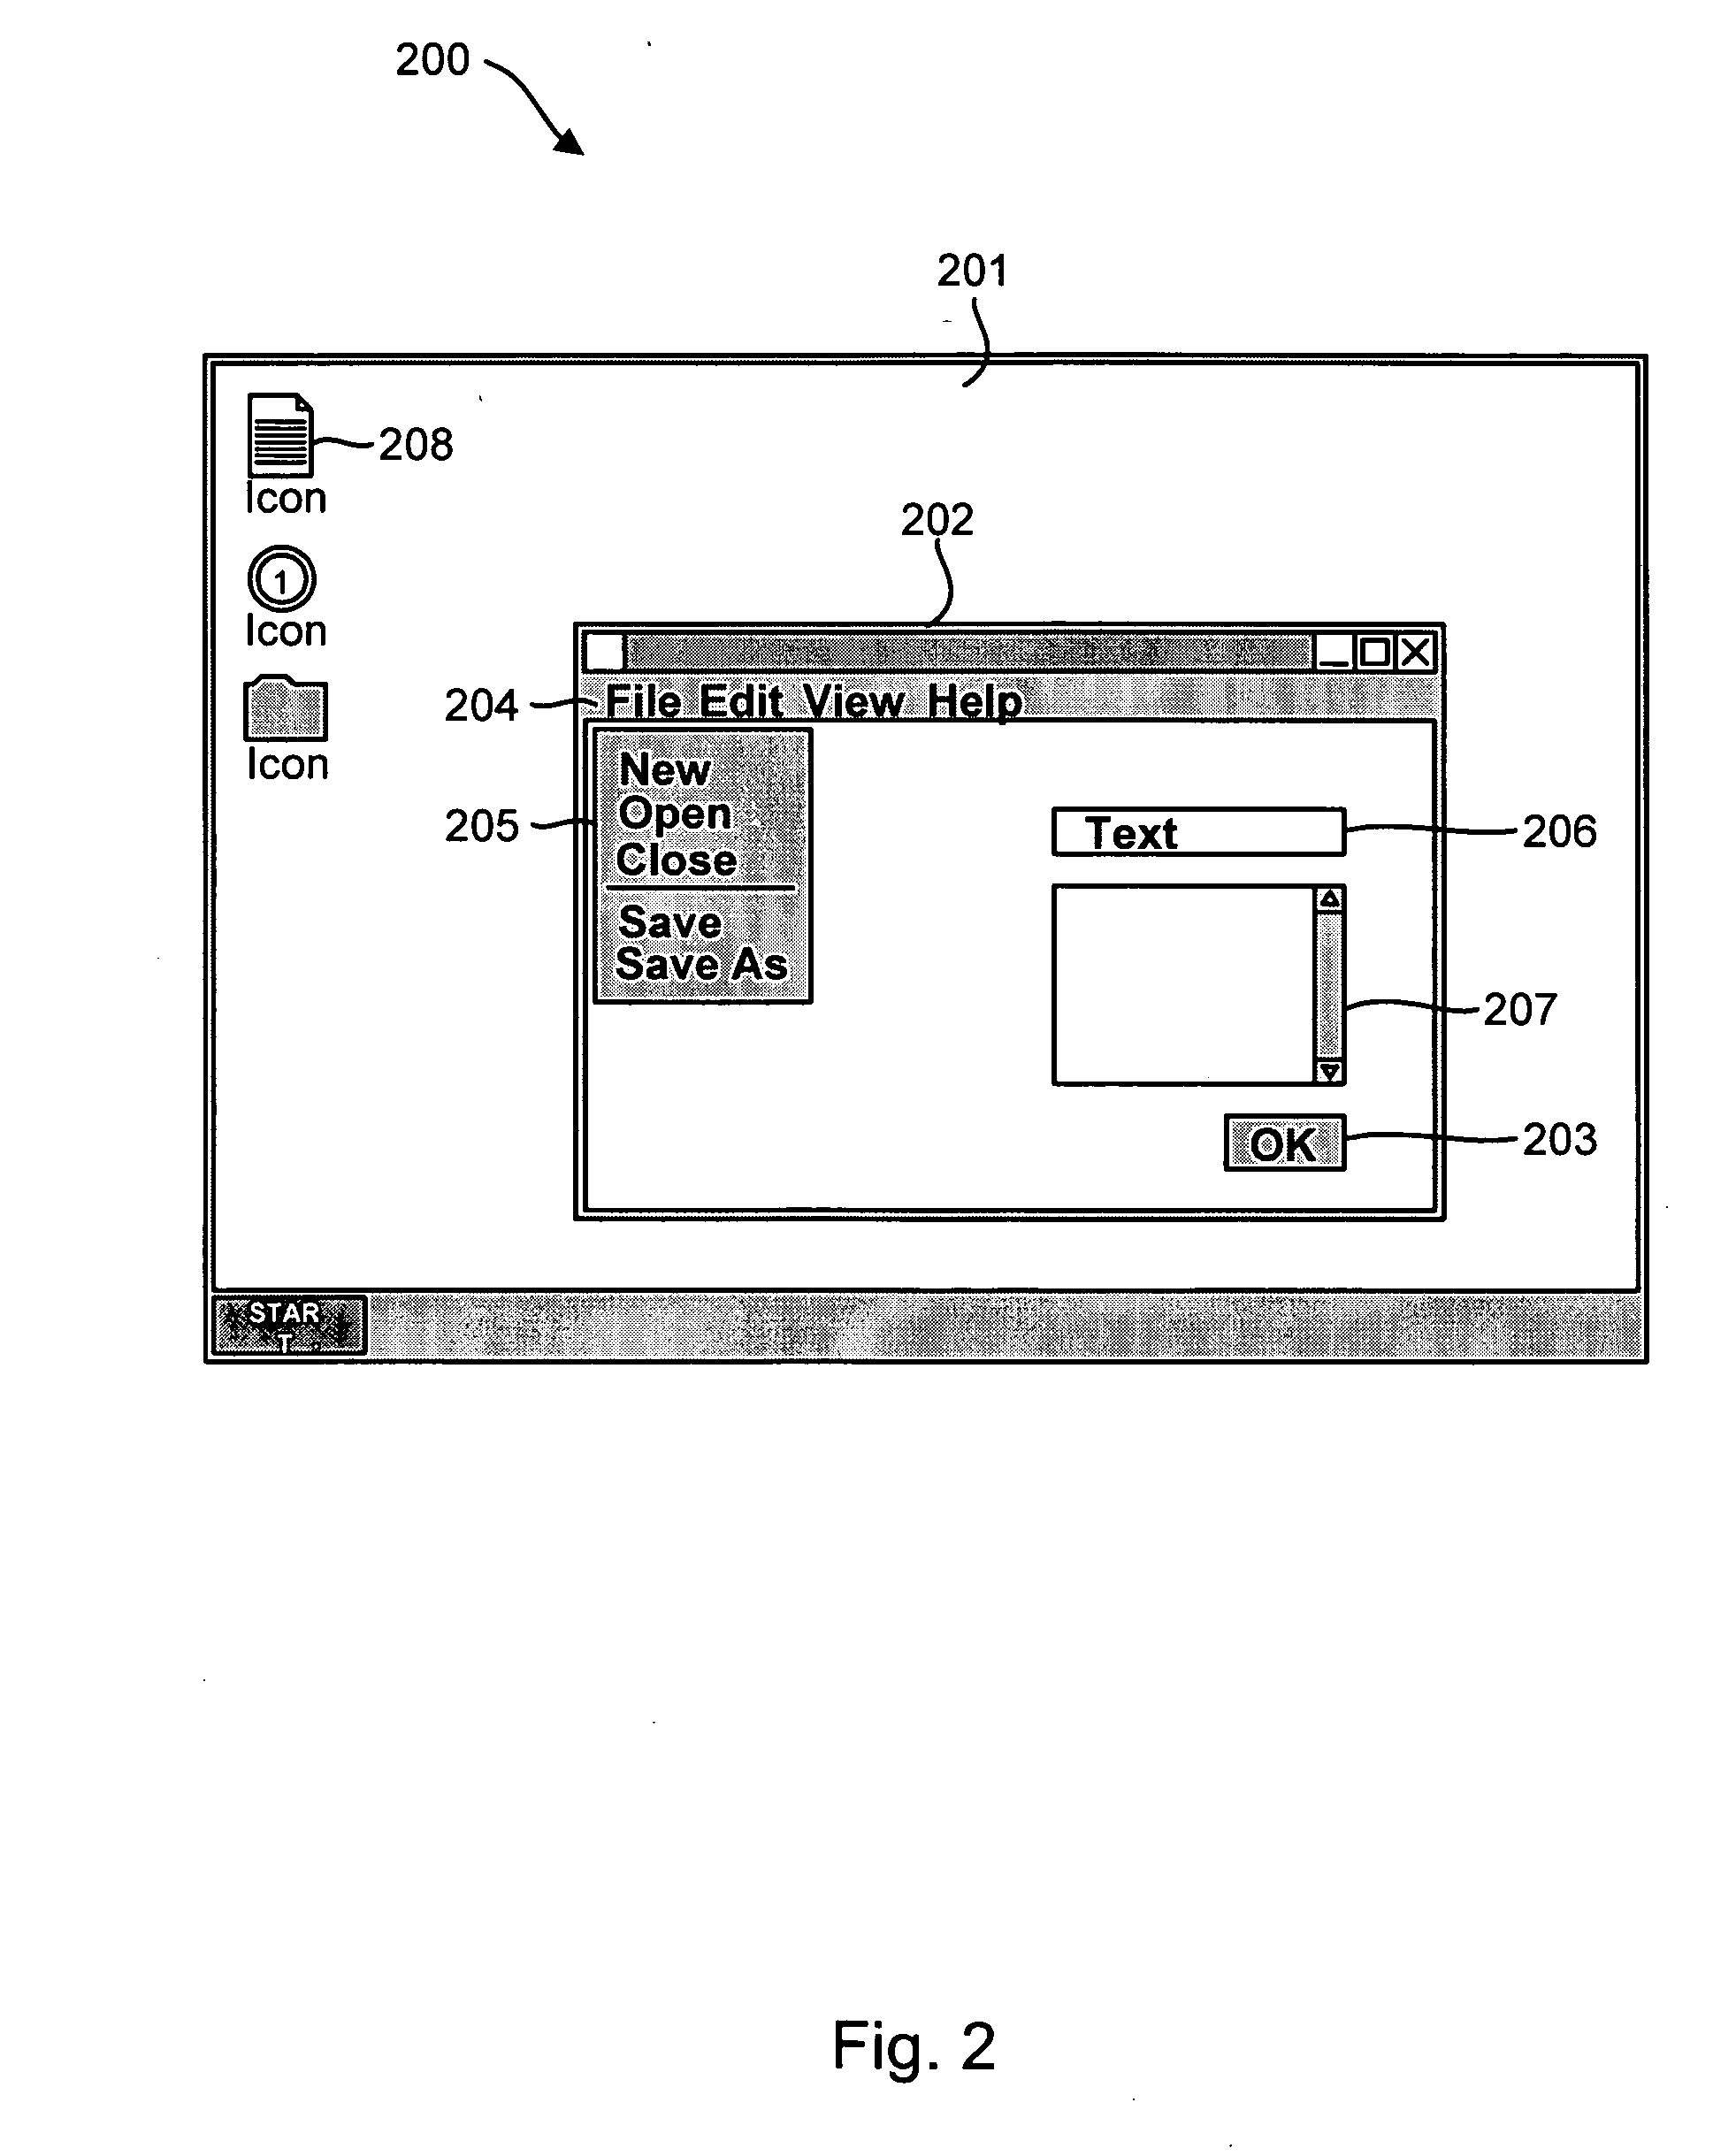 Systems and methods for teaching a person to interact with a computer program having a graphical user interface